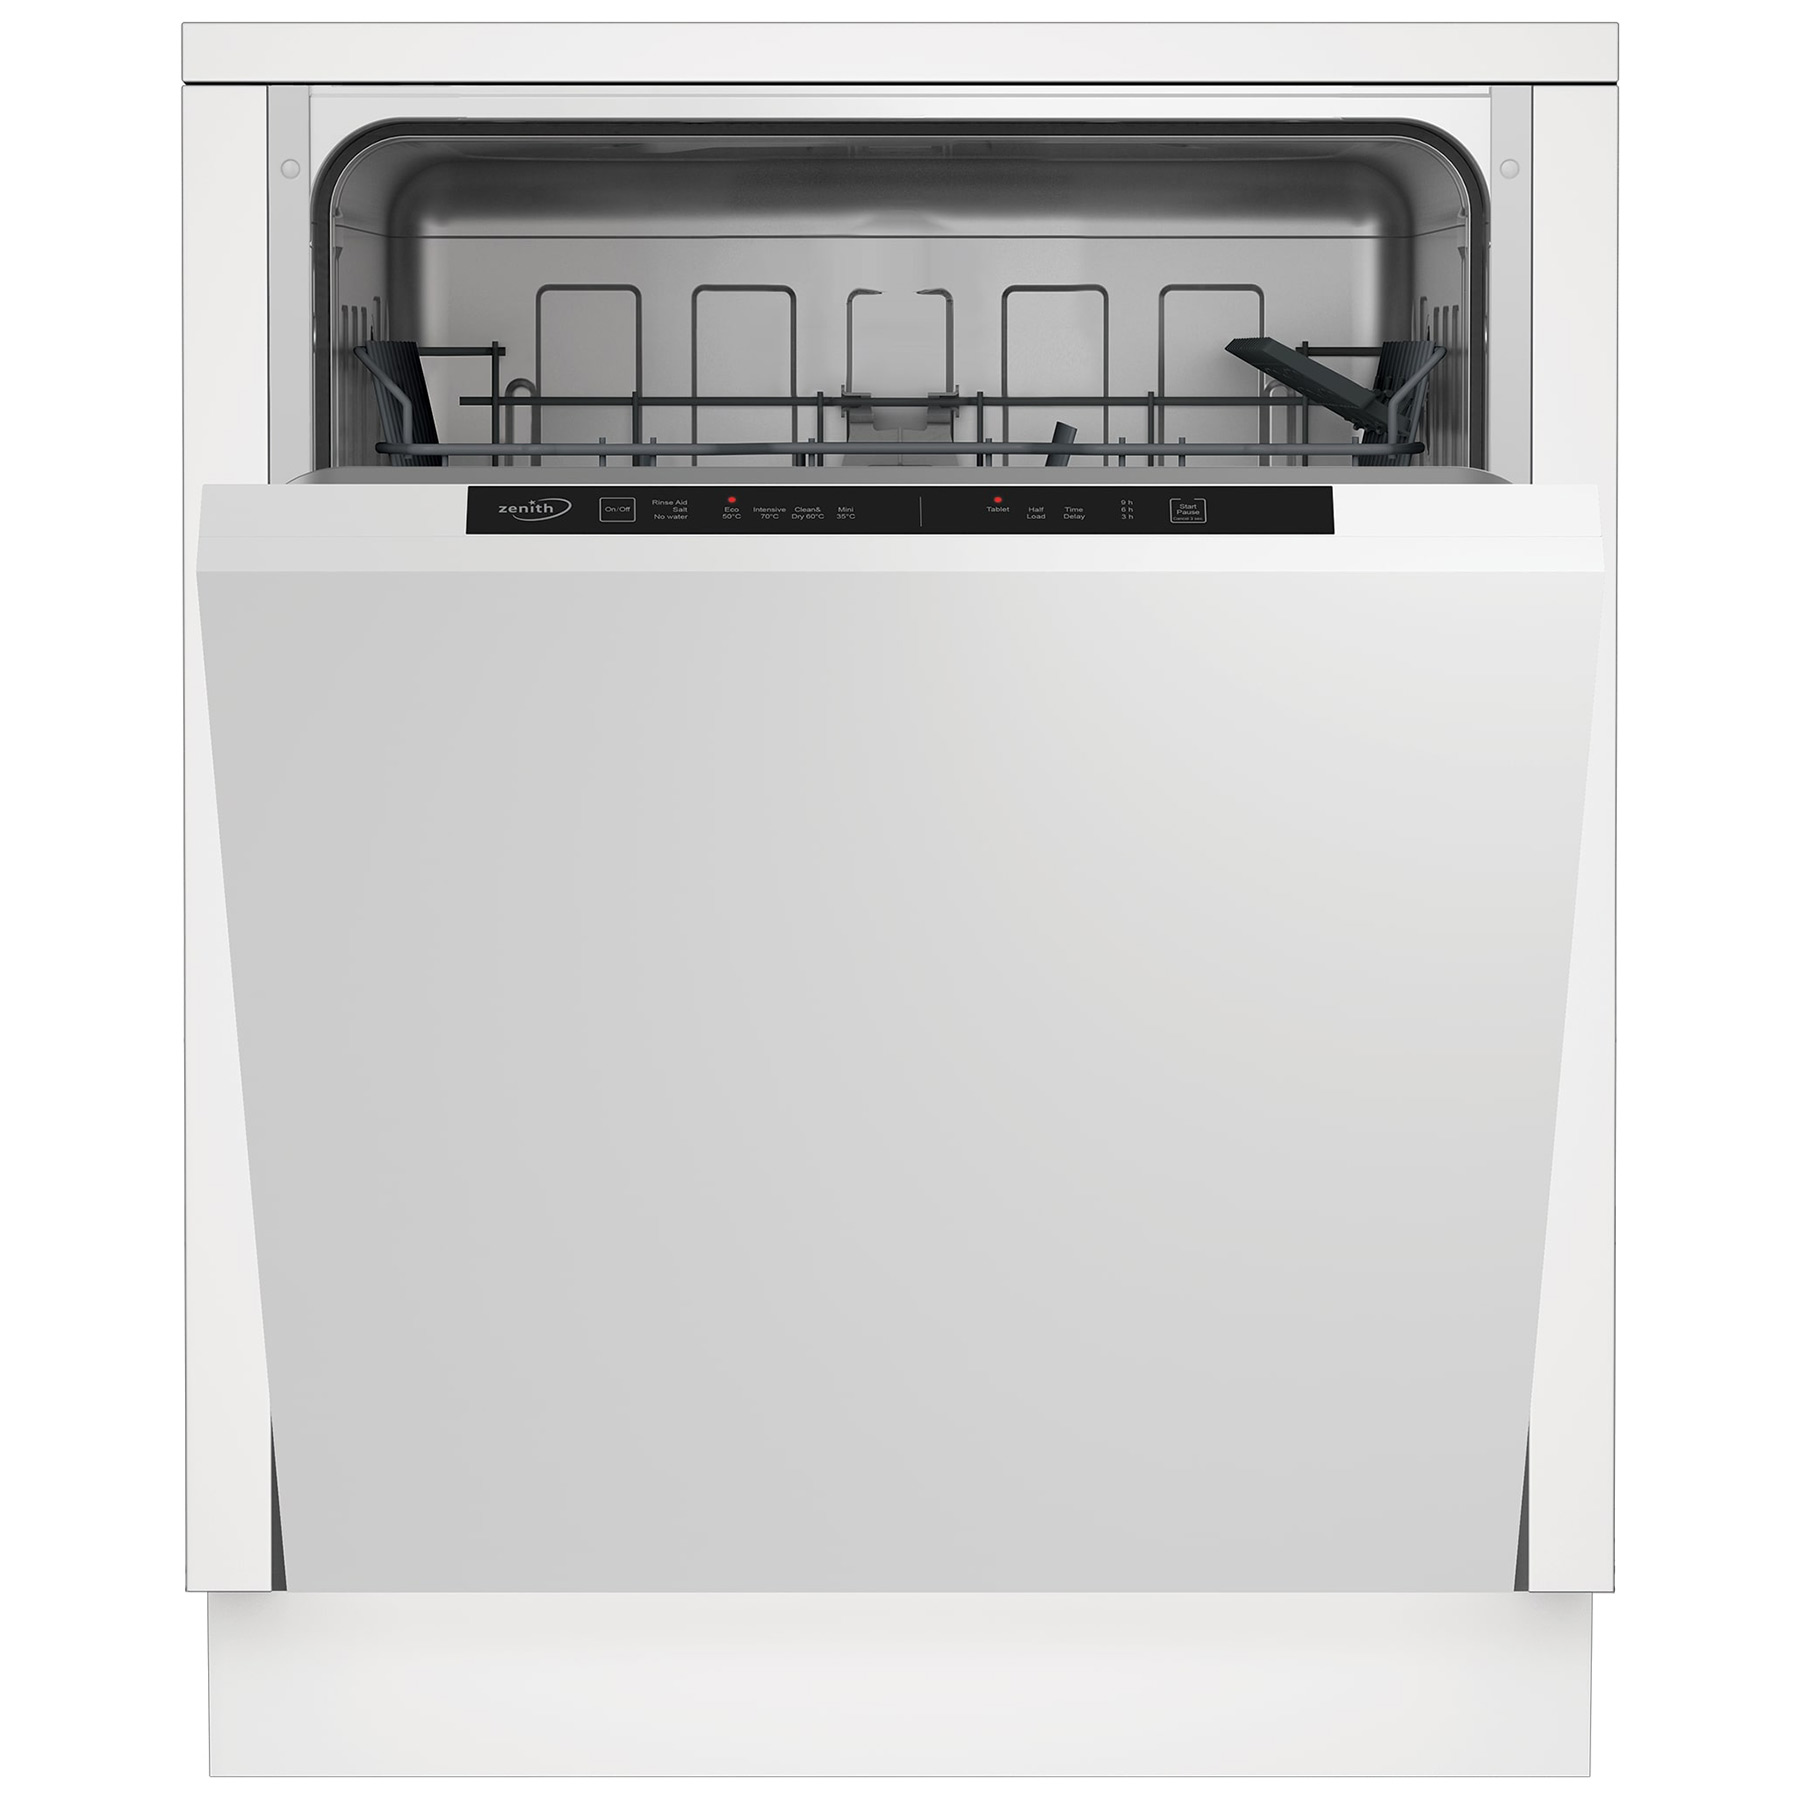 Image of Zenith ZDWI600 60cm Fully Integrated Dishwasher 13 Place F Rated